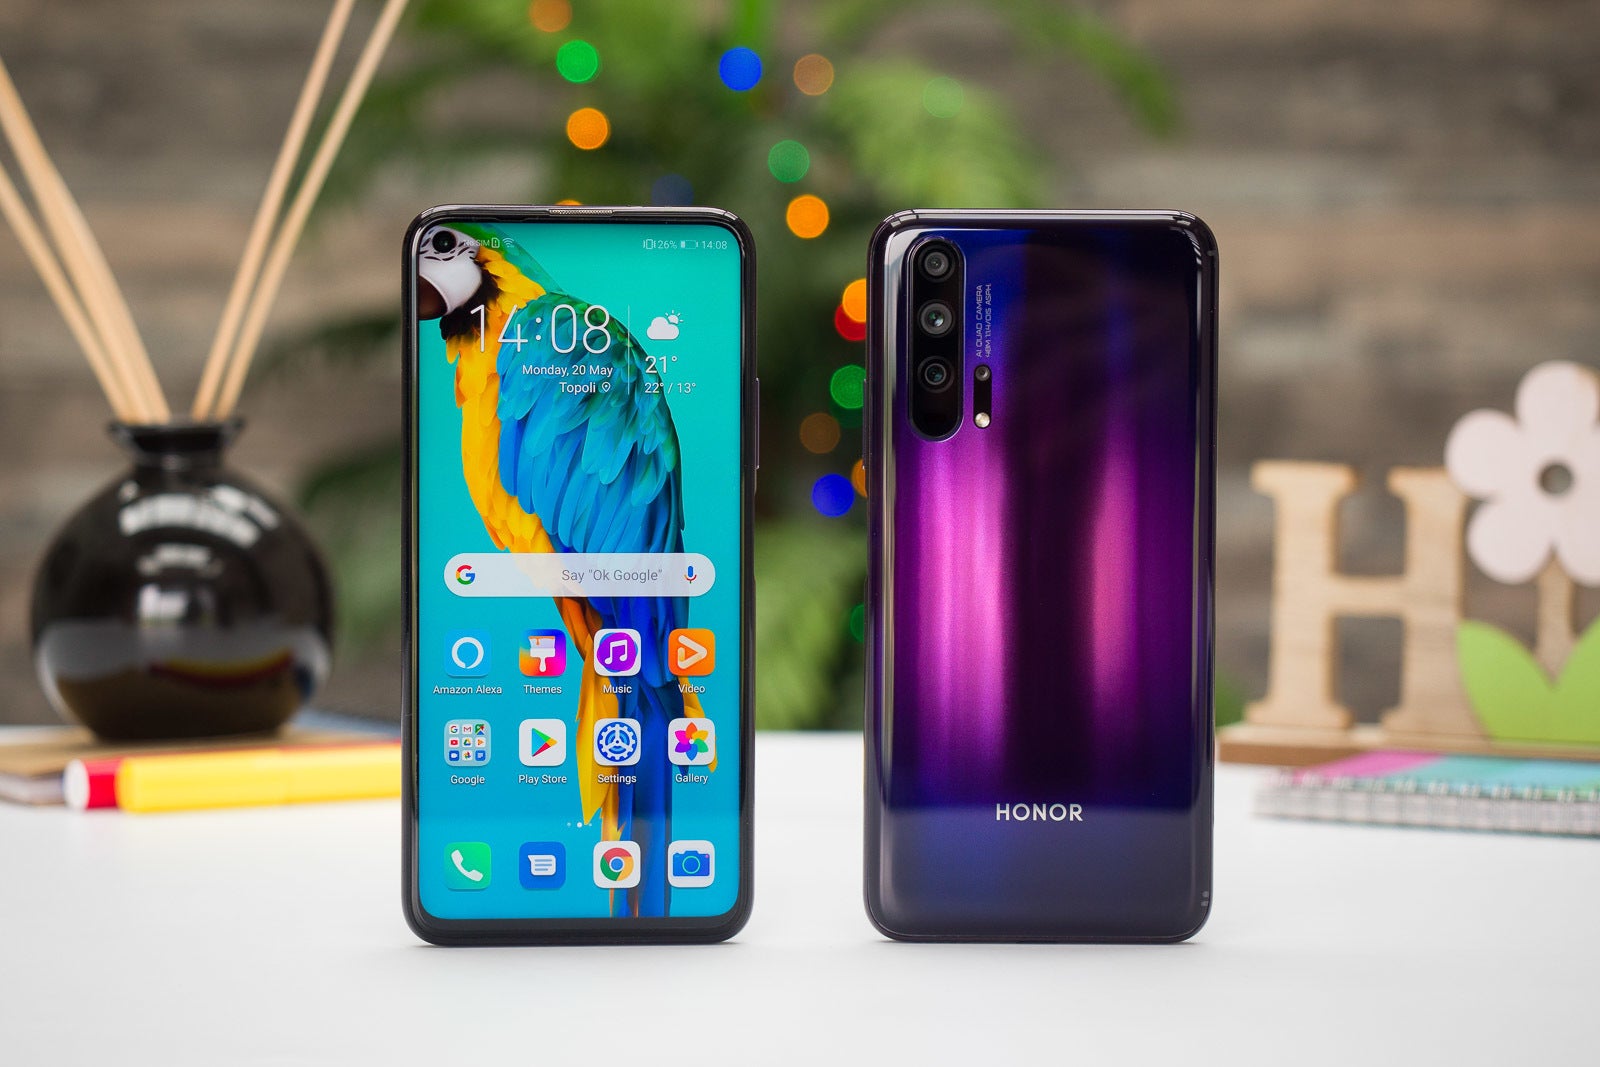 The Honor 20 Pro has an eye-catching design, that's for sure - Top companies reveal to us the twisty path of smartphone design